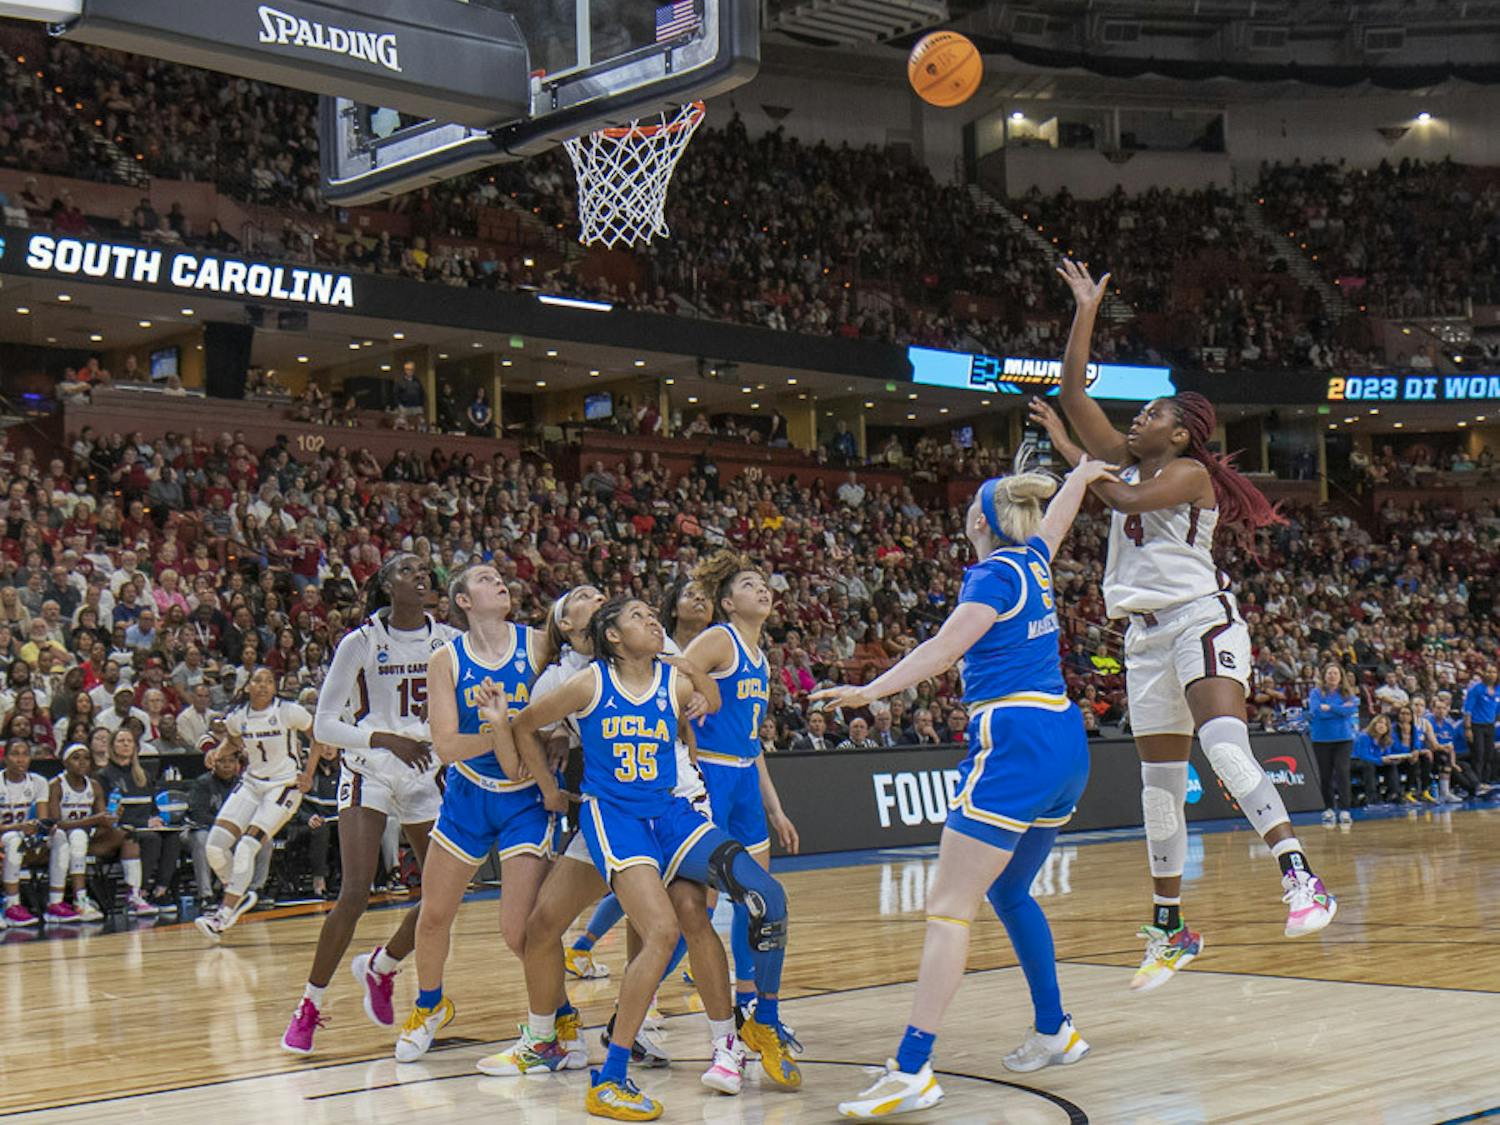 Senior forward Aliyah Boston goes in for a point during the match against UCLA at Bon Secours Wellness Arena in Greenville, South Carolina, on March 25, 2023. The Gamecocks beat the Bruins 59-43 and will move on to the Elite Eight tournament.&nbsp;